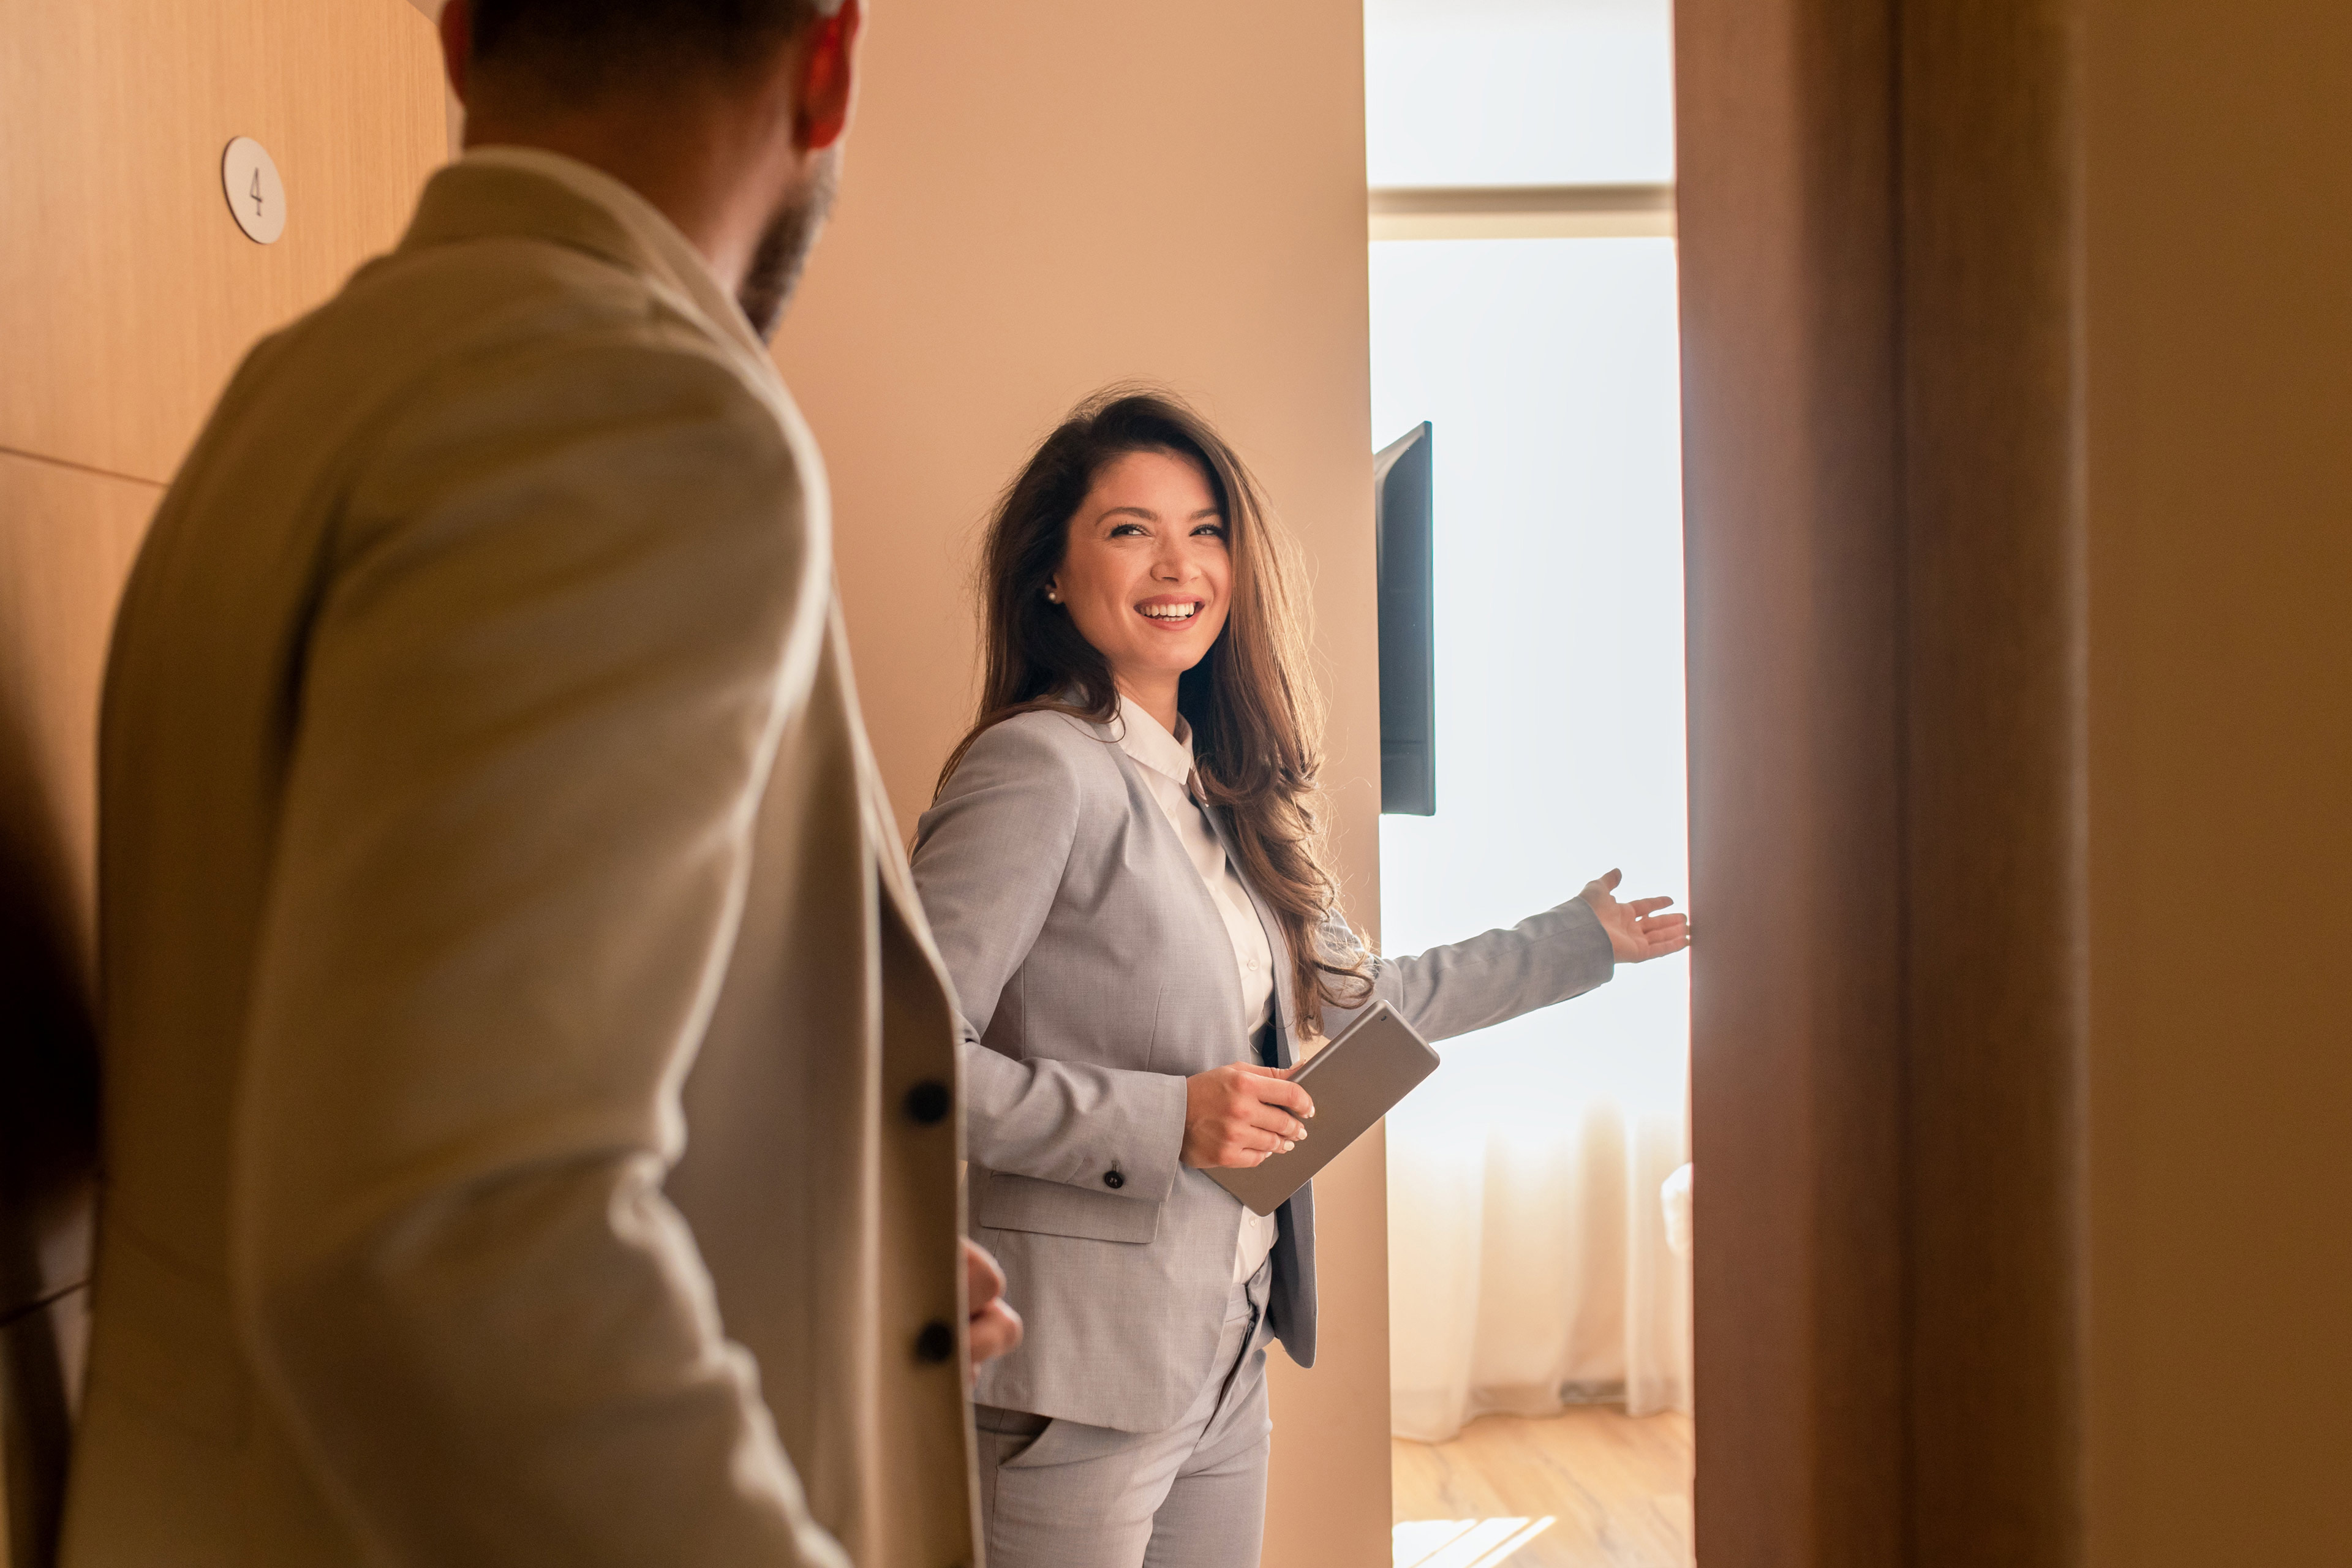 https://assets.ey.com/content/dam/ey-sites/ey-com/en_us/topics/real-estate-hospitality-and-construction/ey-young-businessman-check-in-in-hotel-smiling-female-receptionist-showing-him-available-rooms.jpg